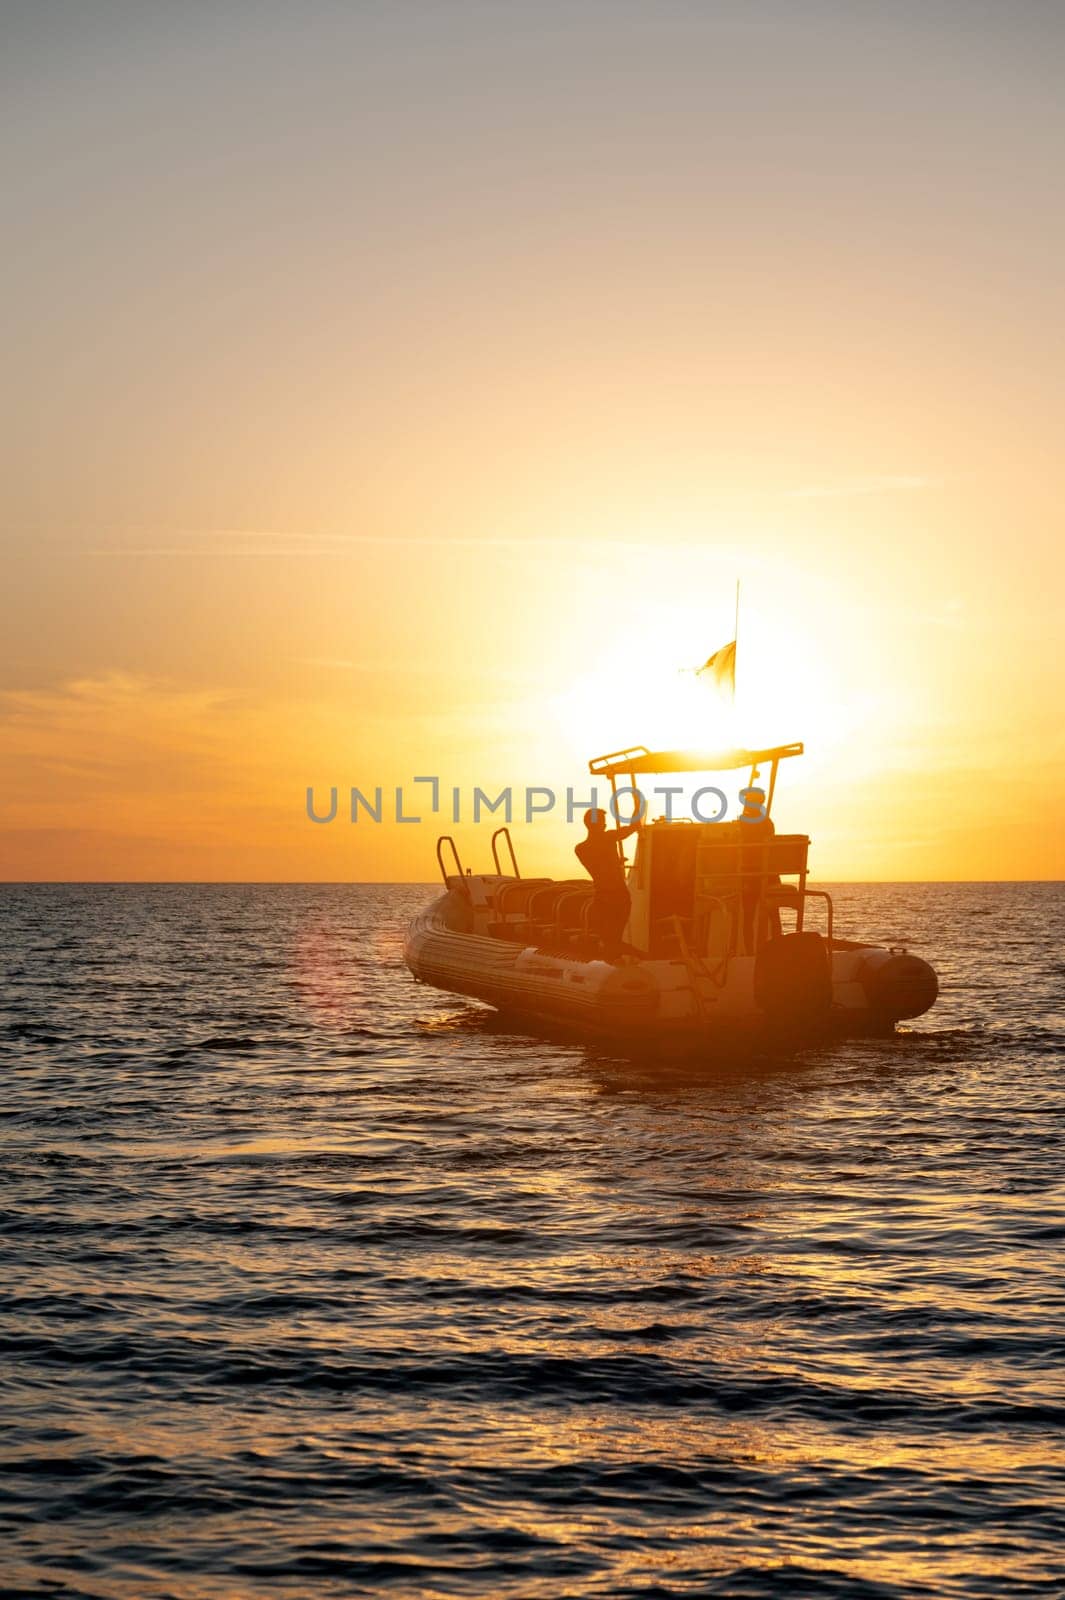 Small fishing boat with two fishermen on board in silhouette light at sunset. Seascape at sunset.